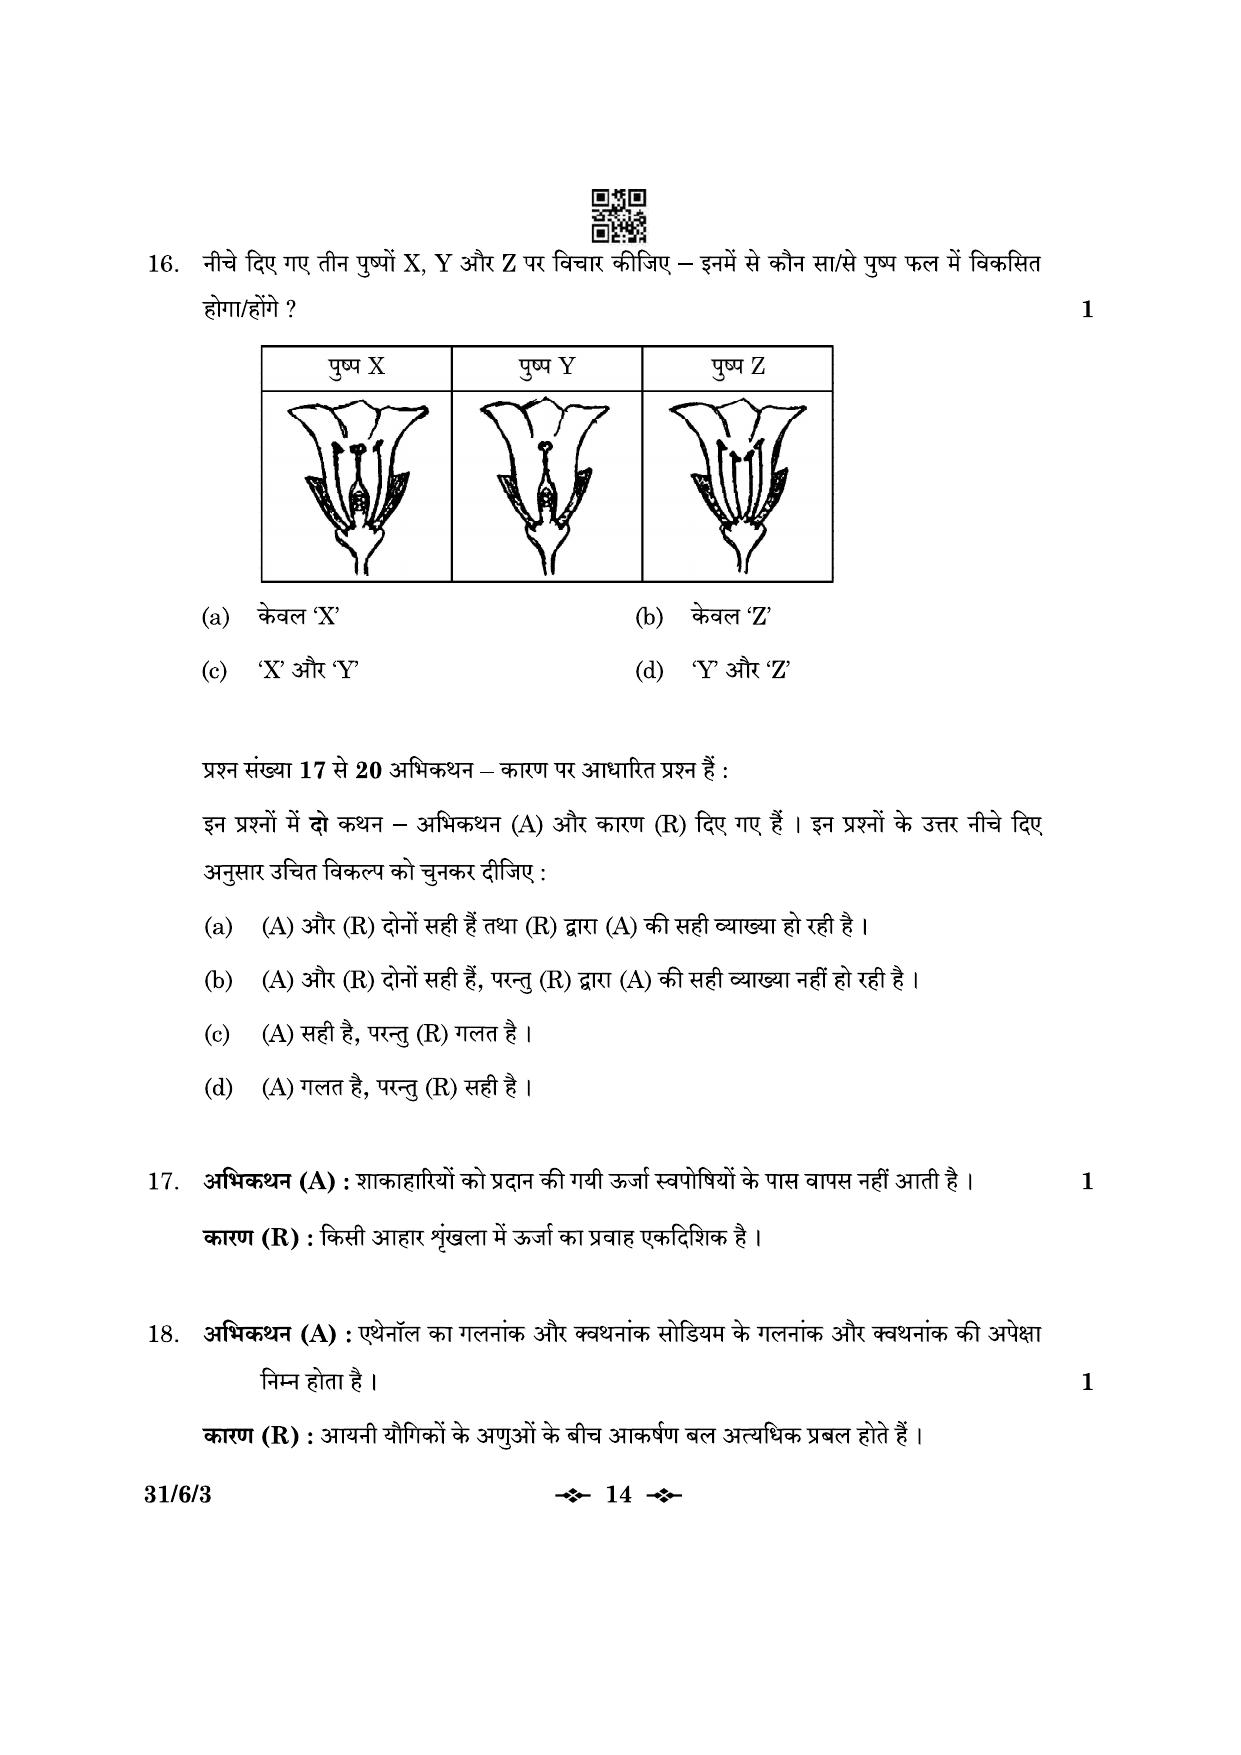 CBSE Class 10 31-6-3 Science 2023 Question Paper - Page 14